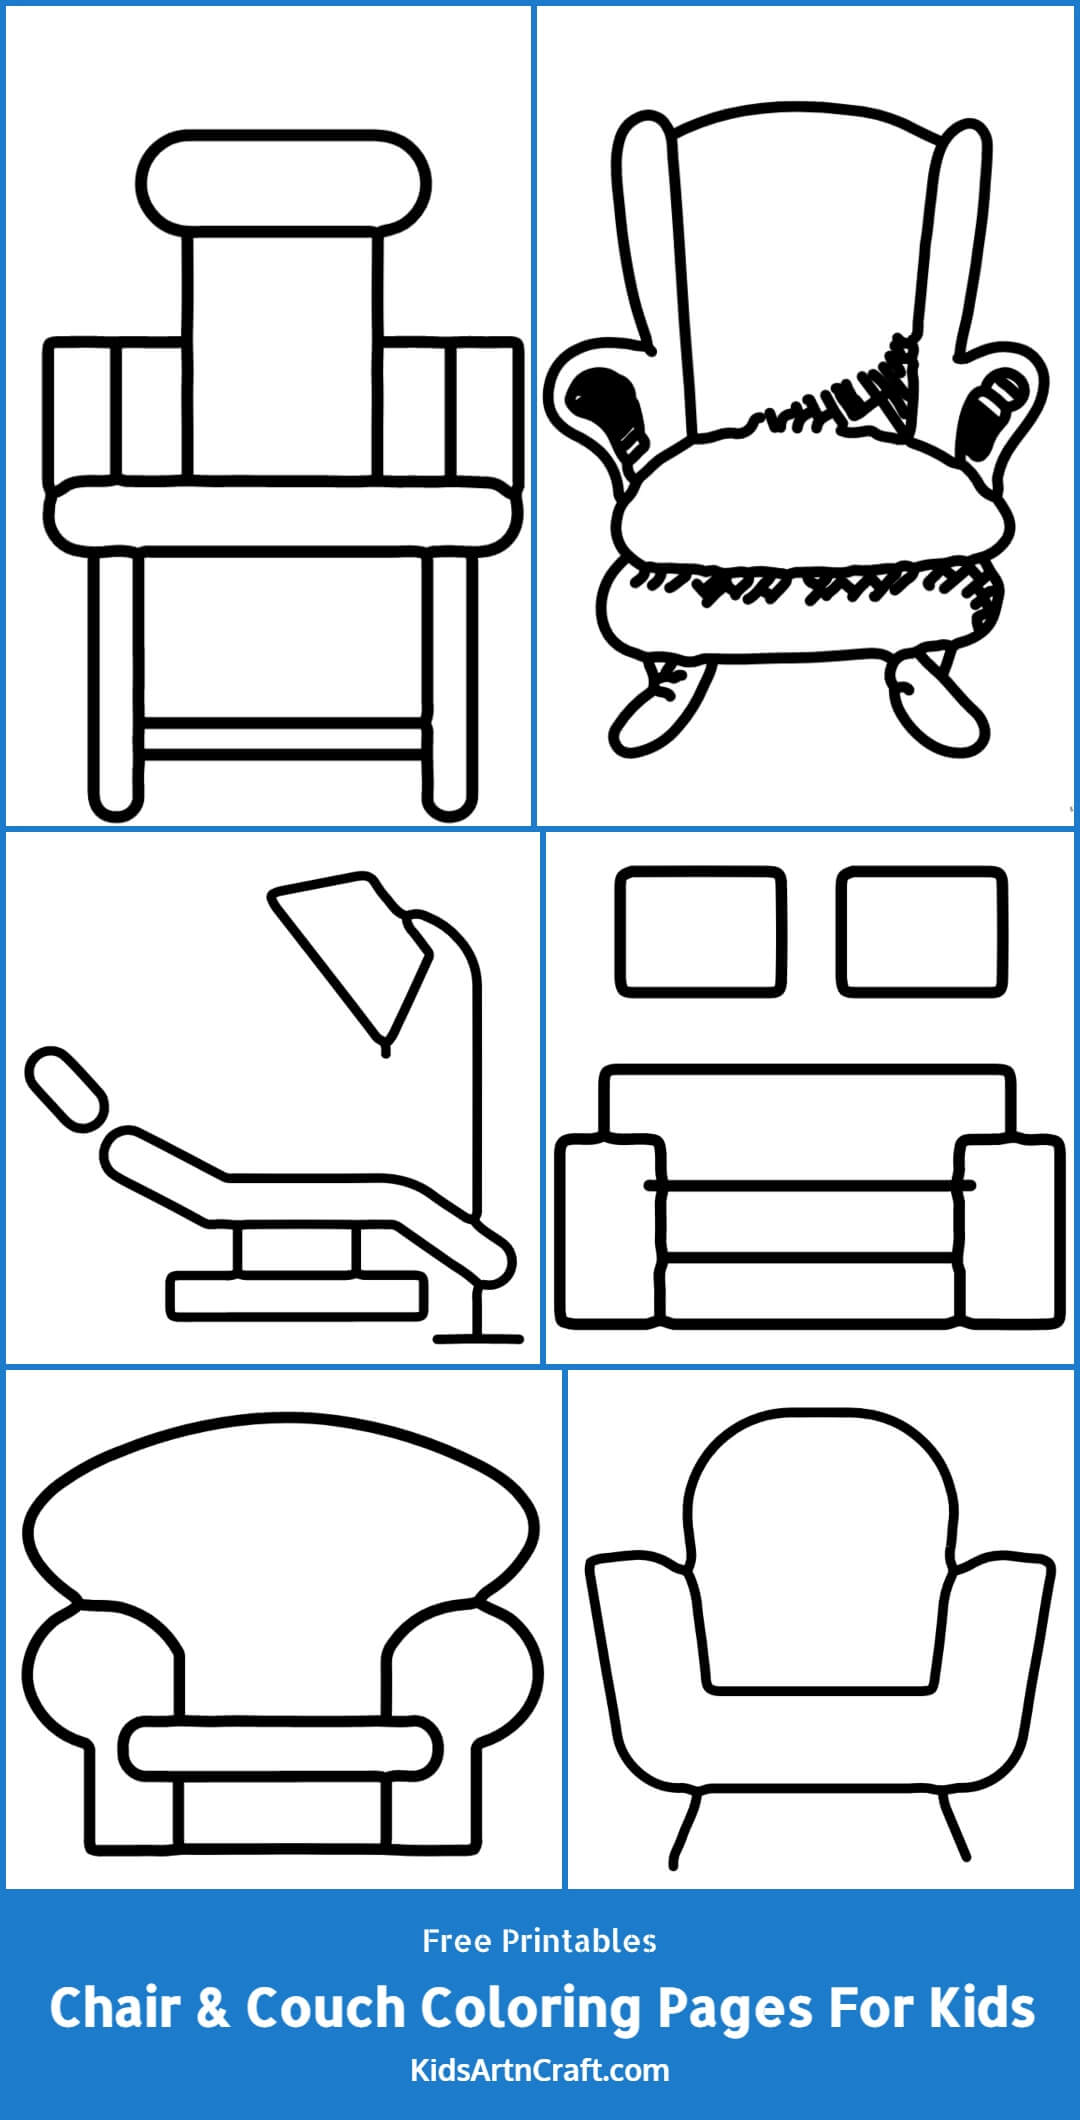 Chair & Couch Coloring Pages For Kids – Free Printables